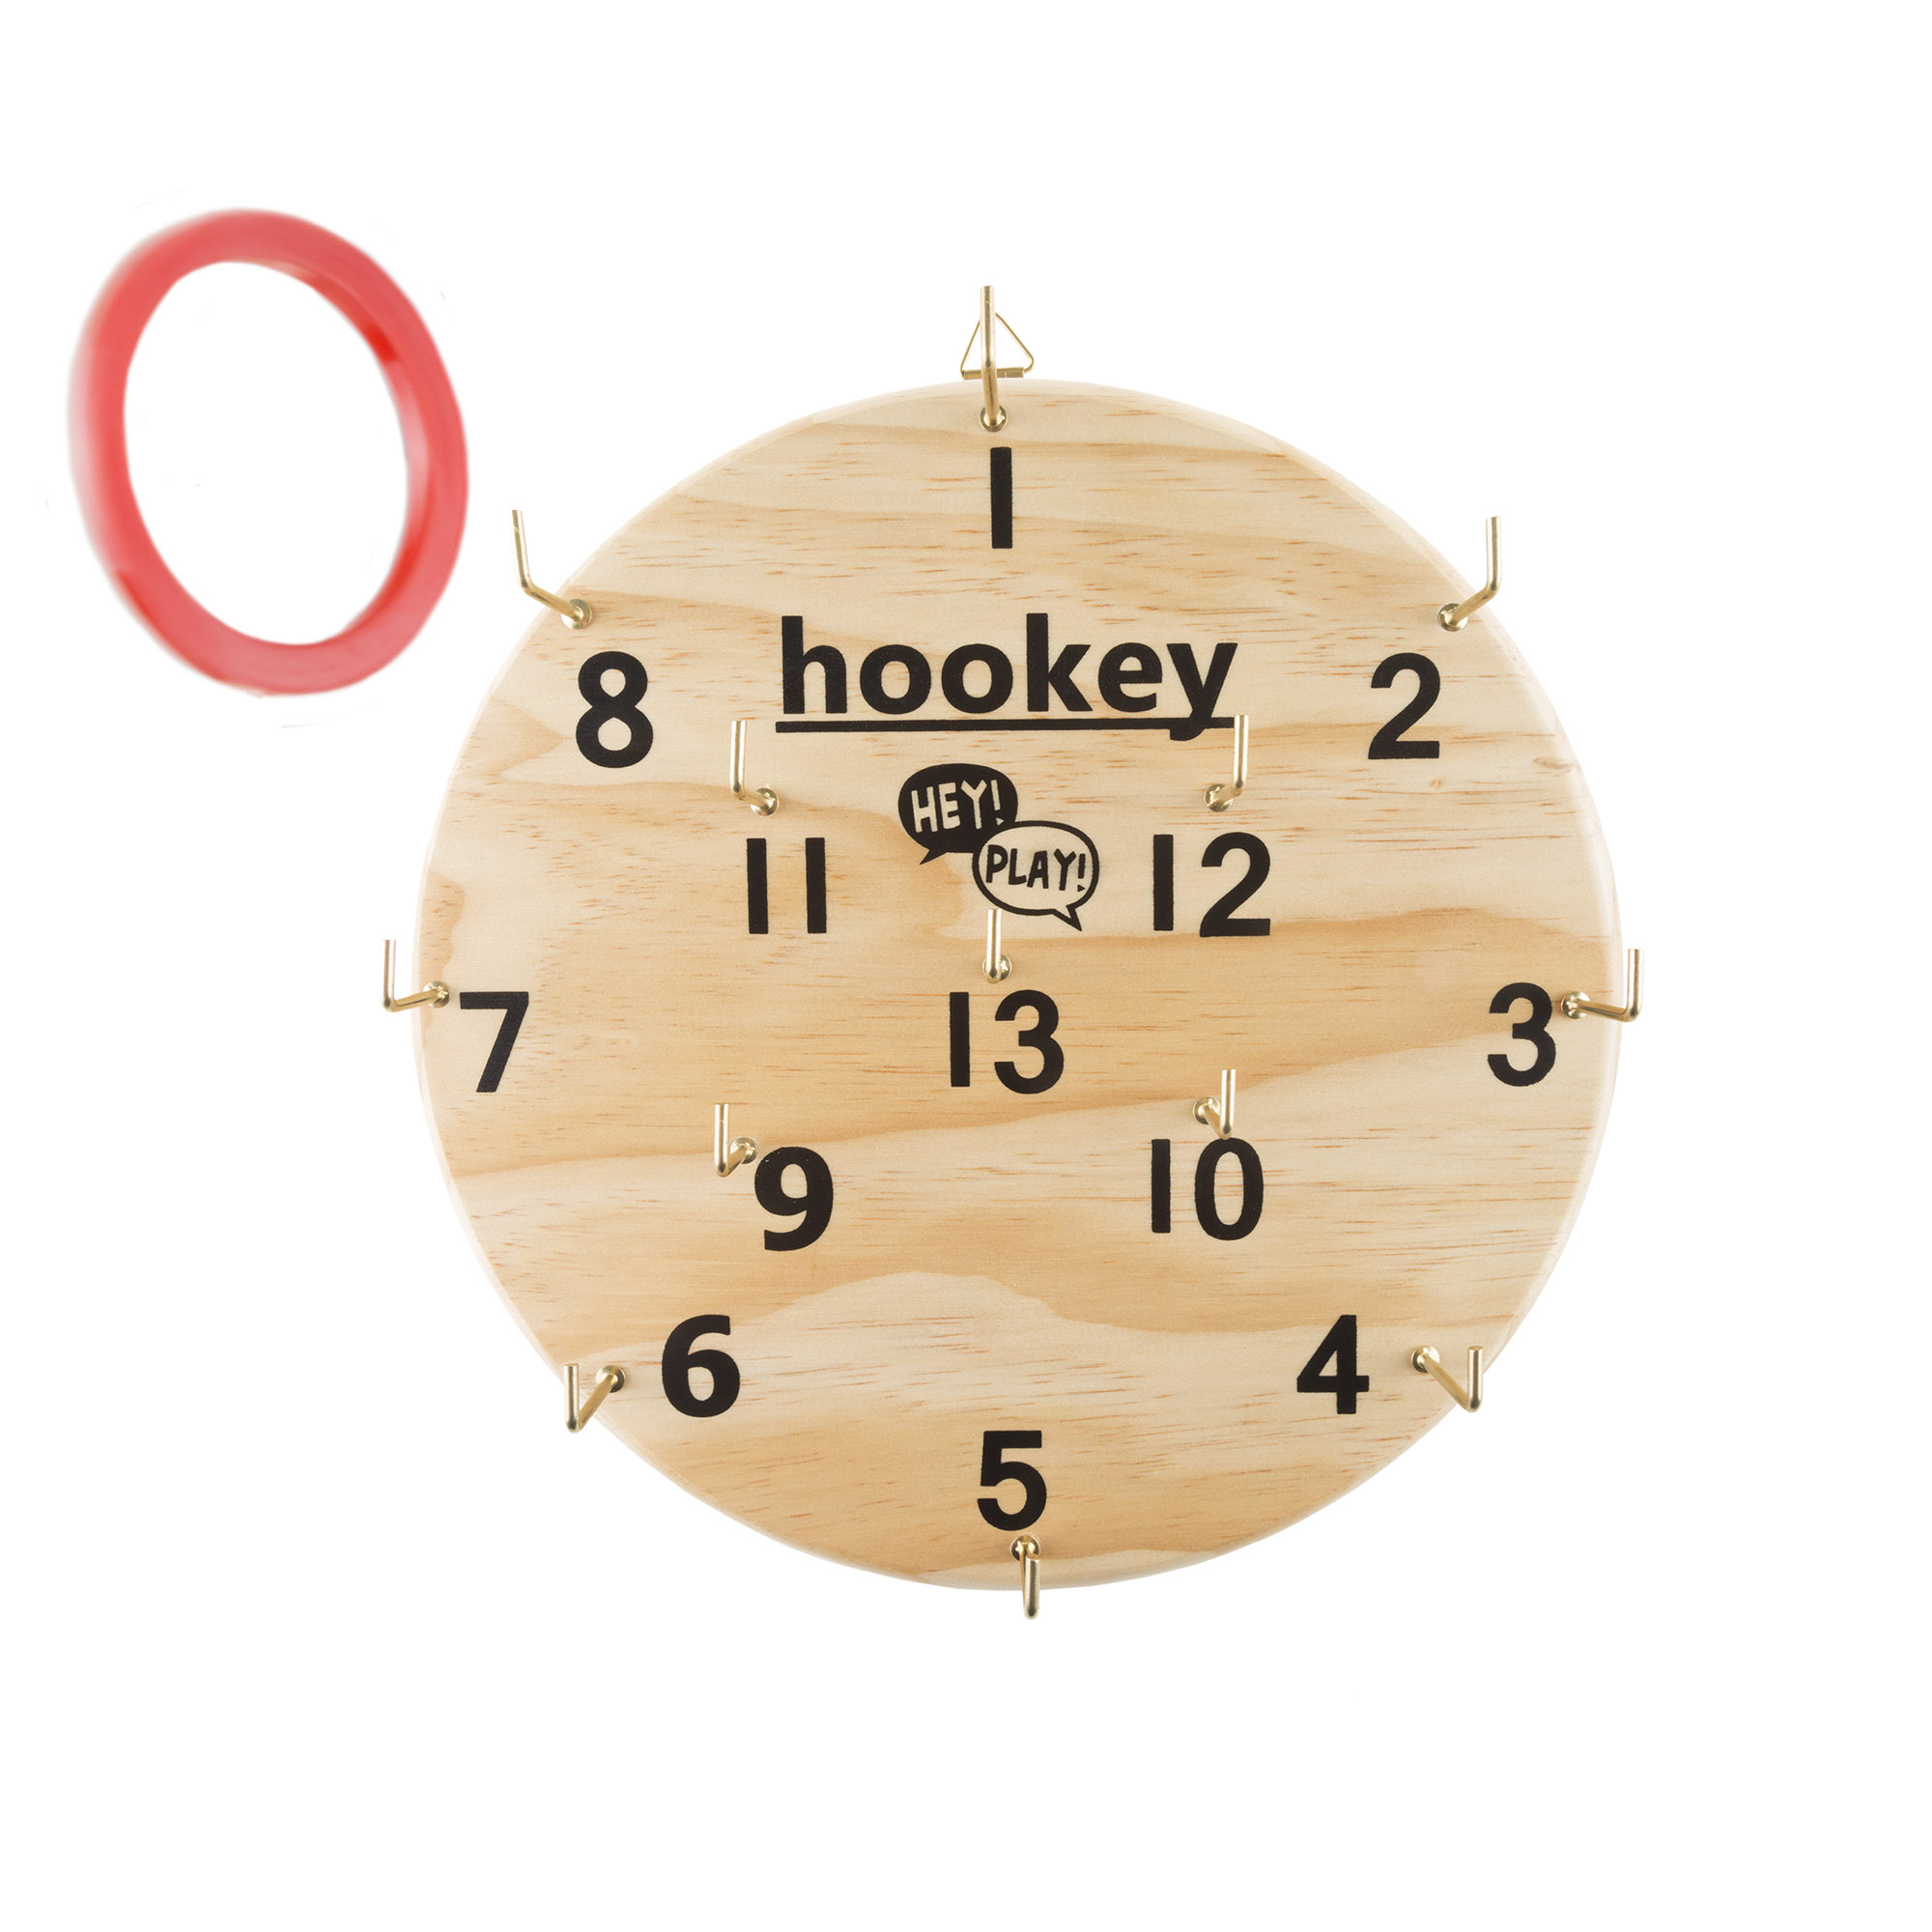 Hey! Play! Hookey Ring Target Toss Game - image 3 of 4